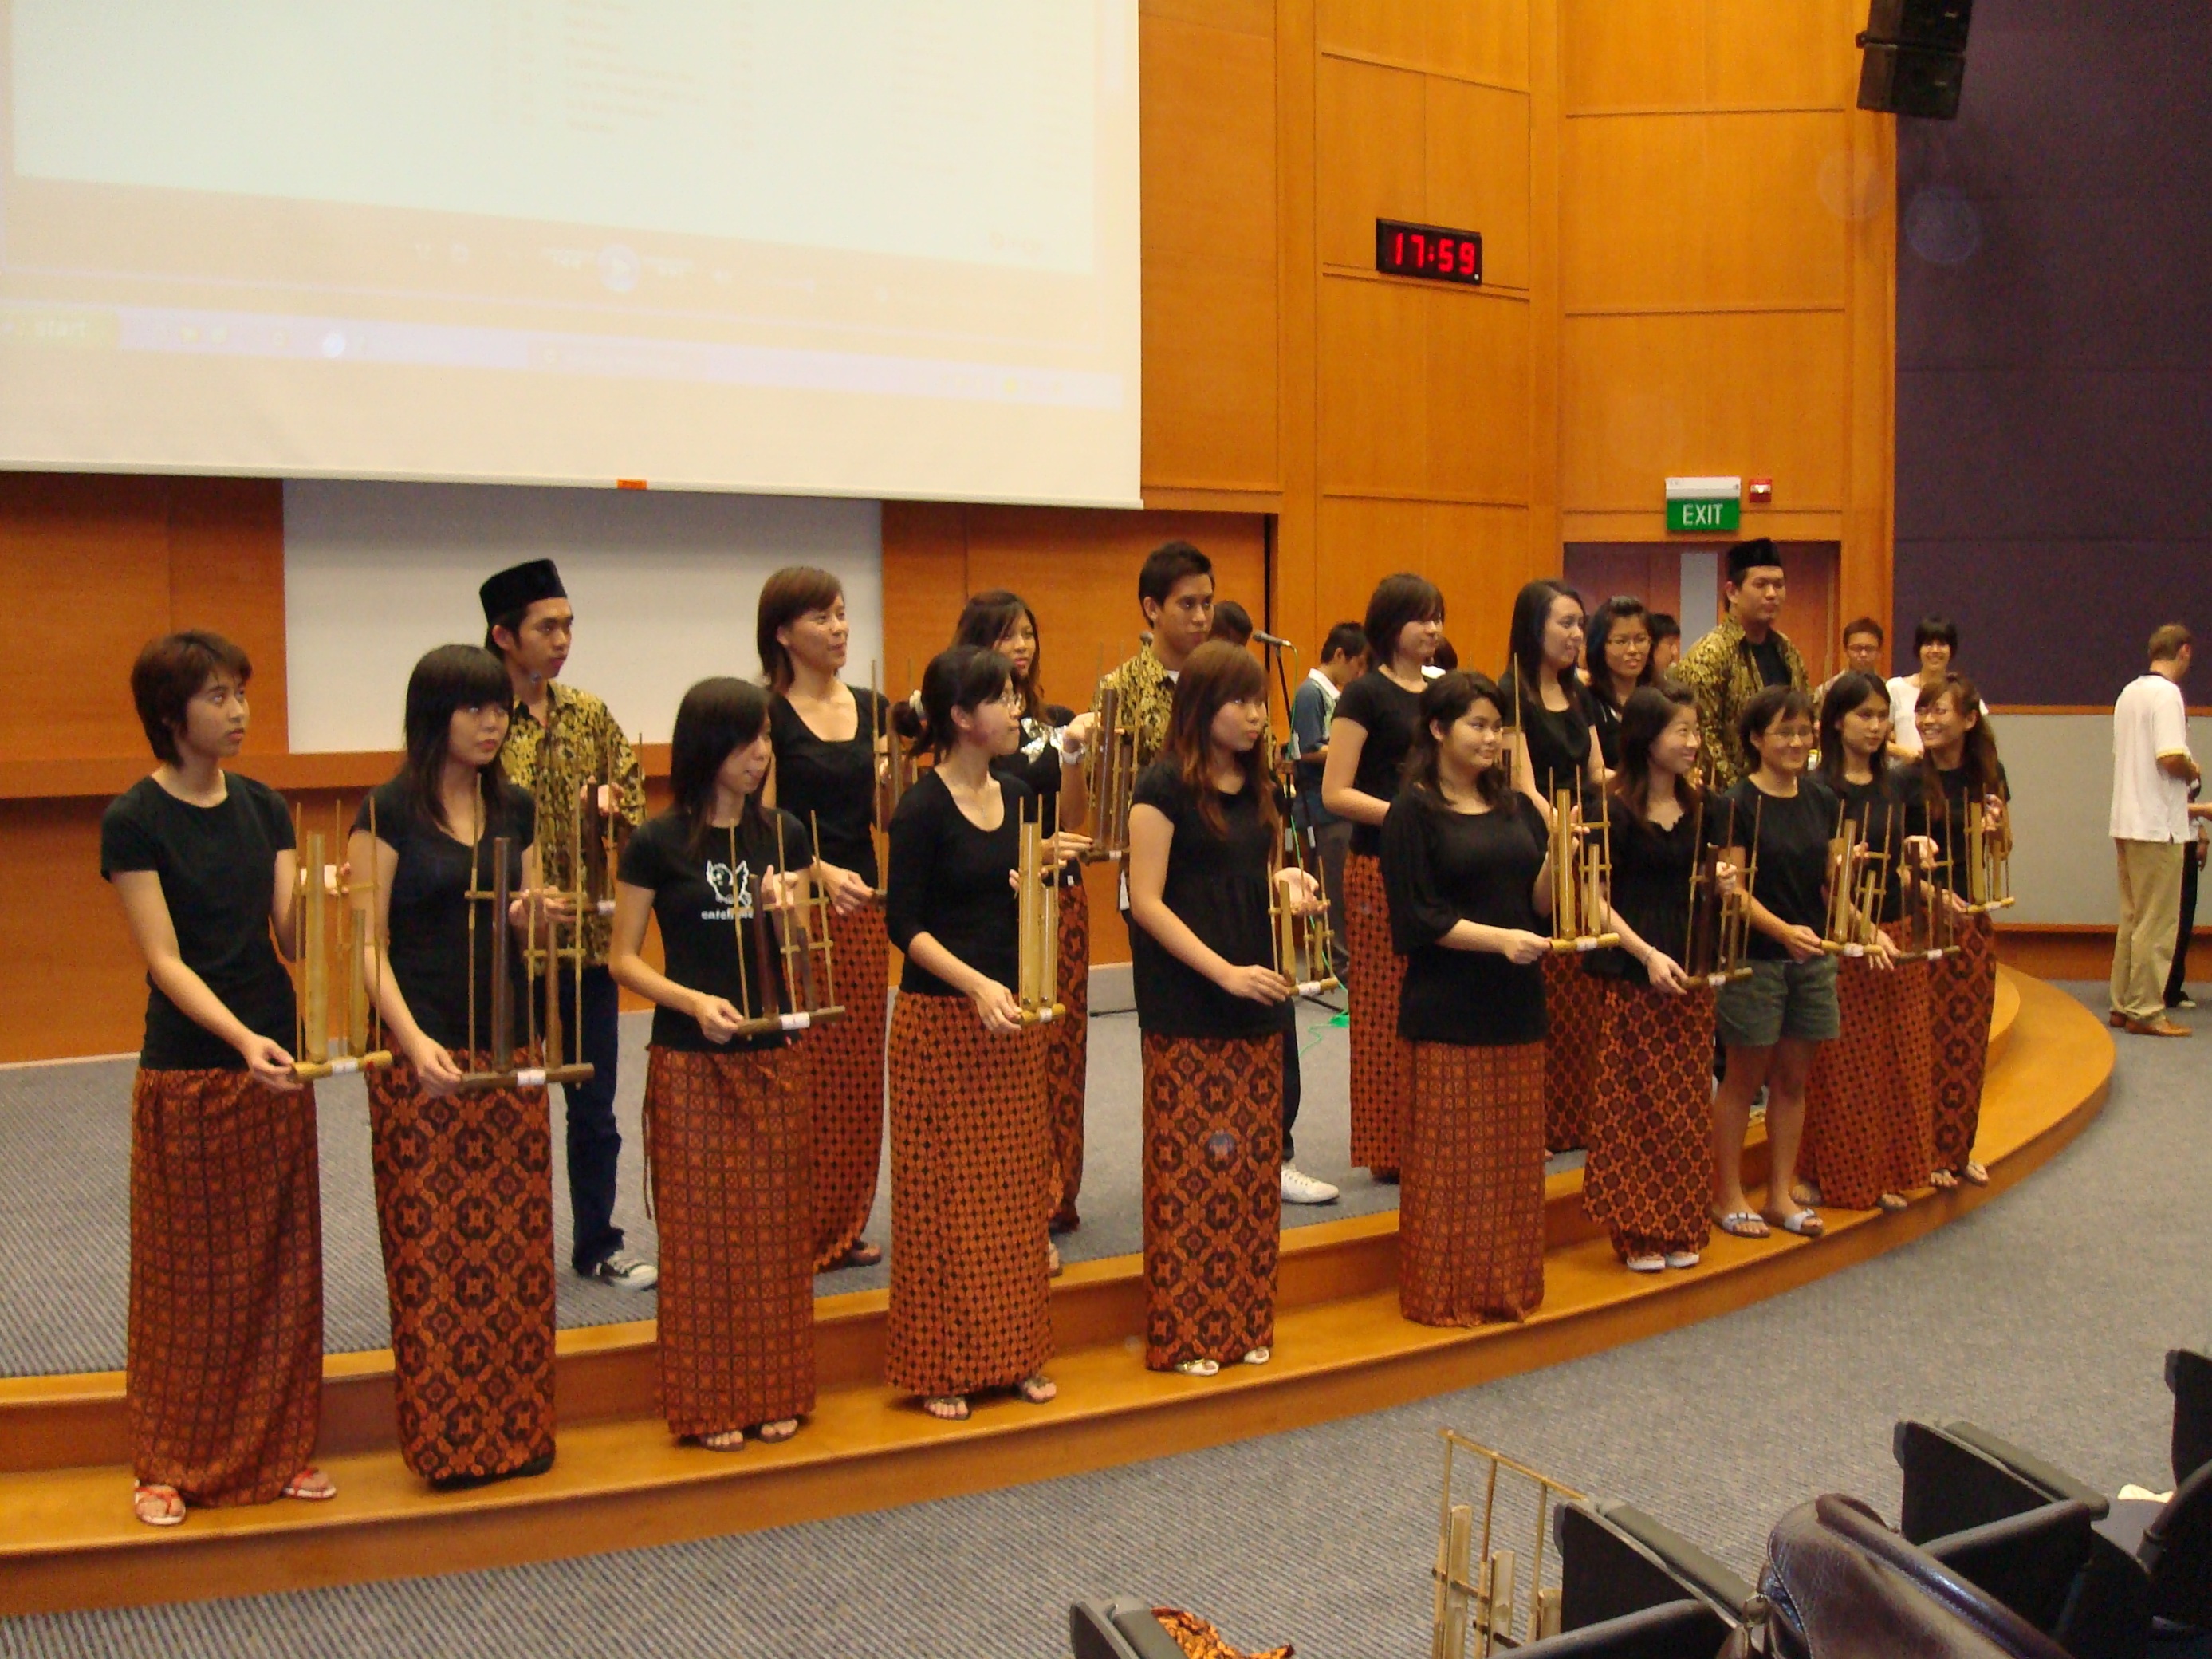 The Angklung Performance